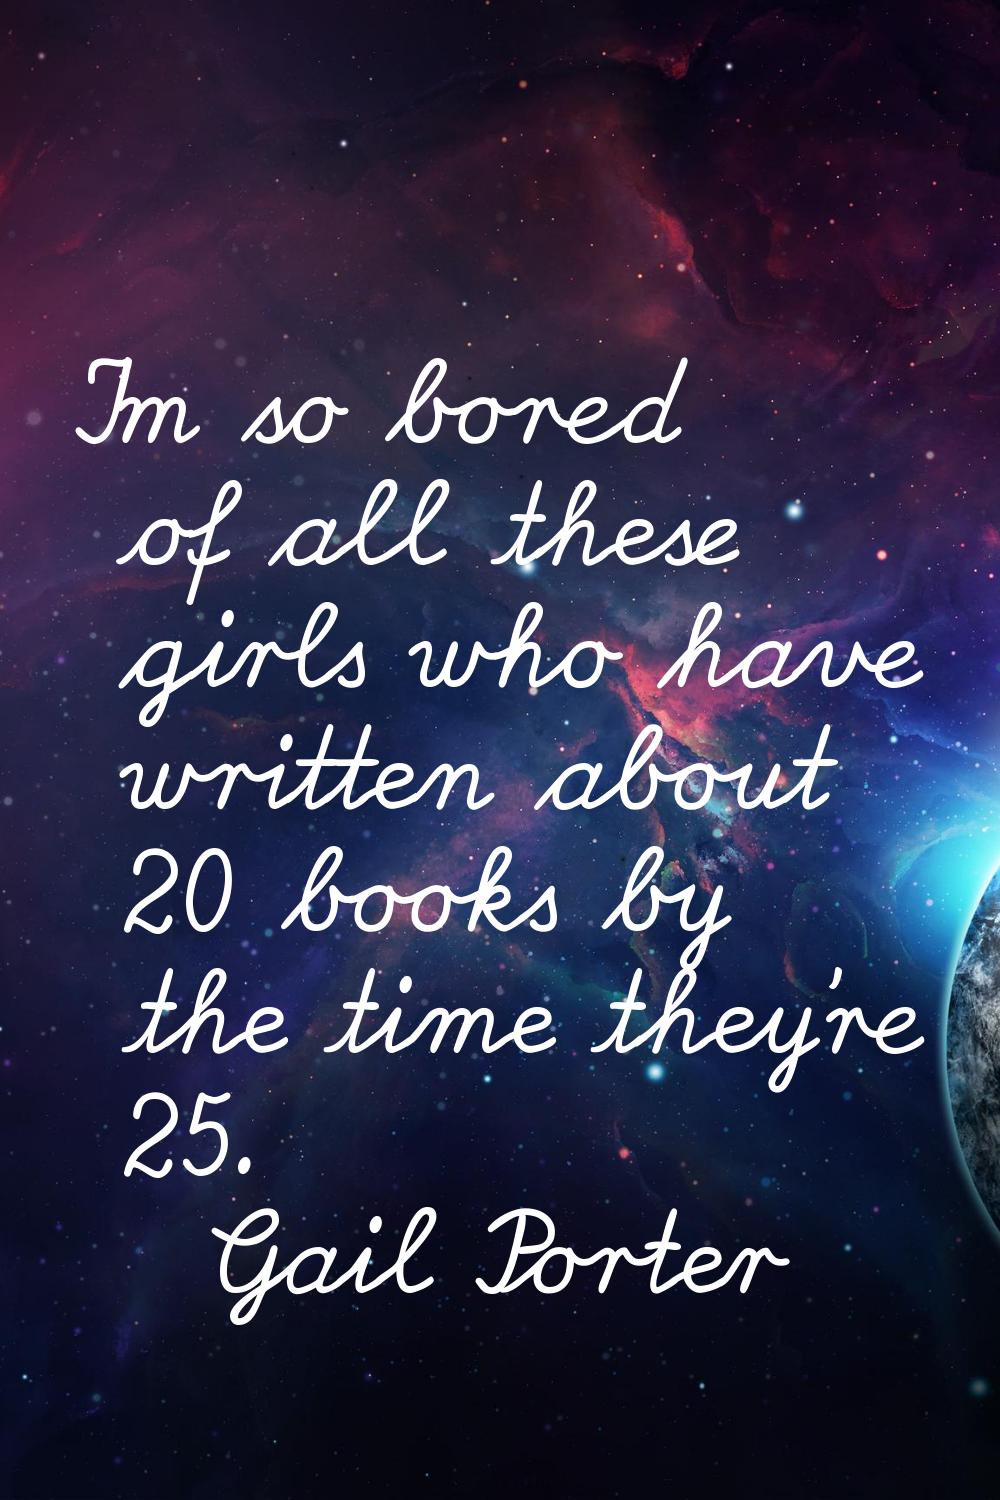 I'm so bored of all these girls who have written about 20 books by the time they're 25.